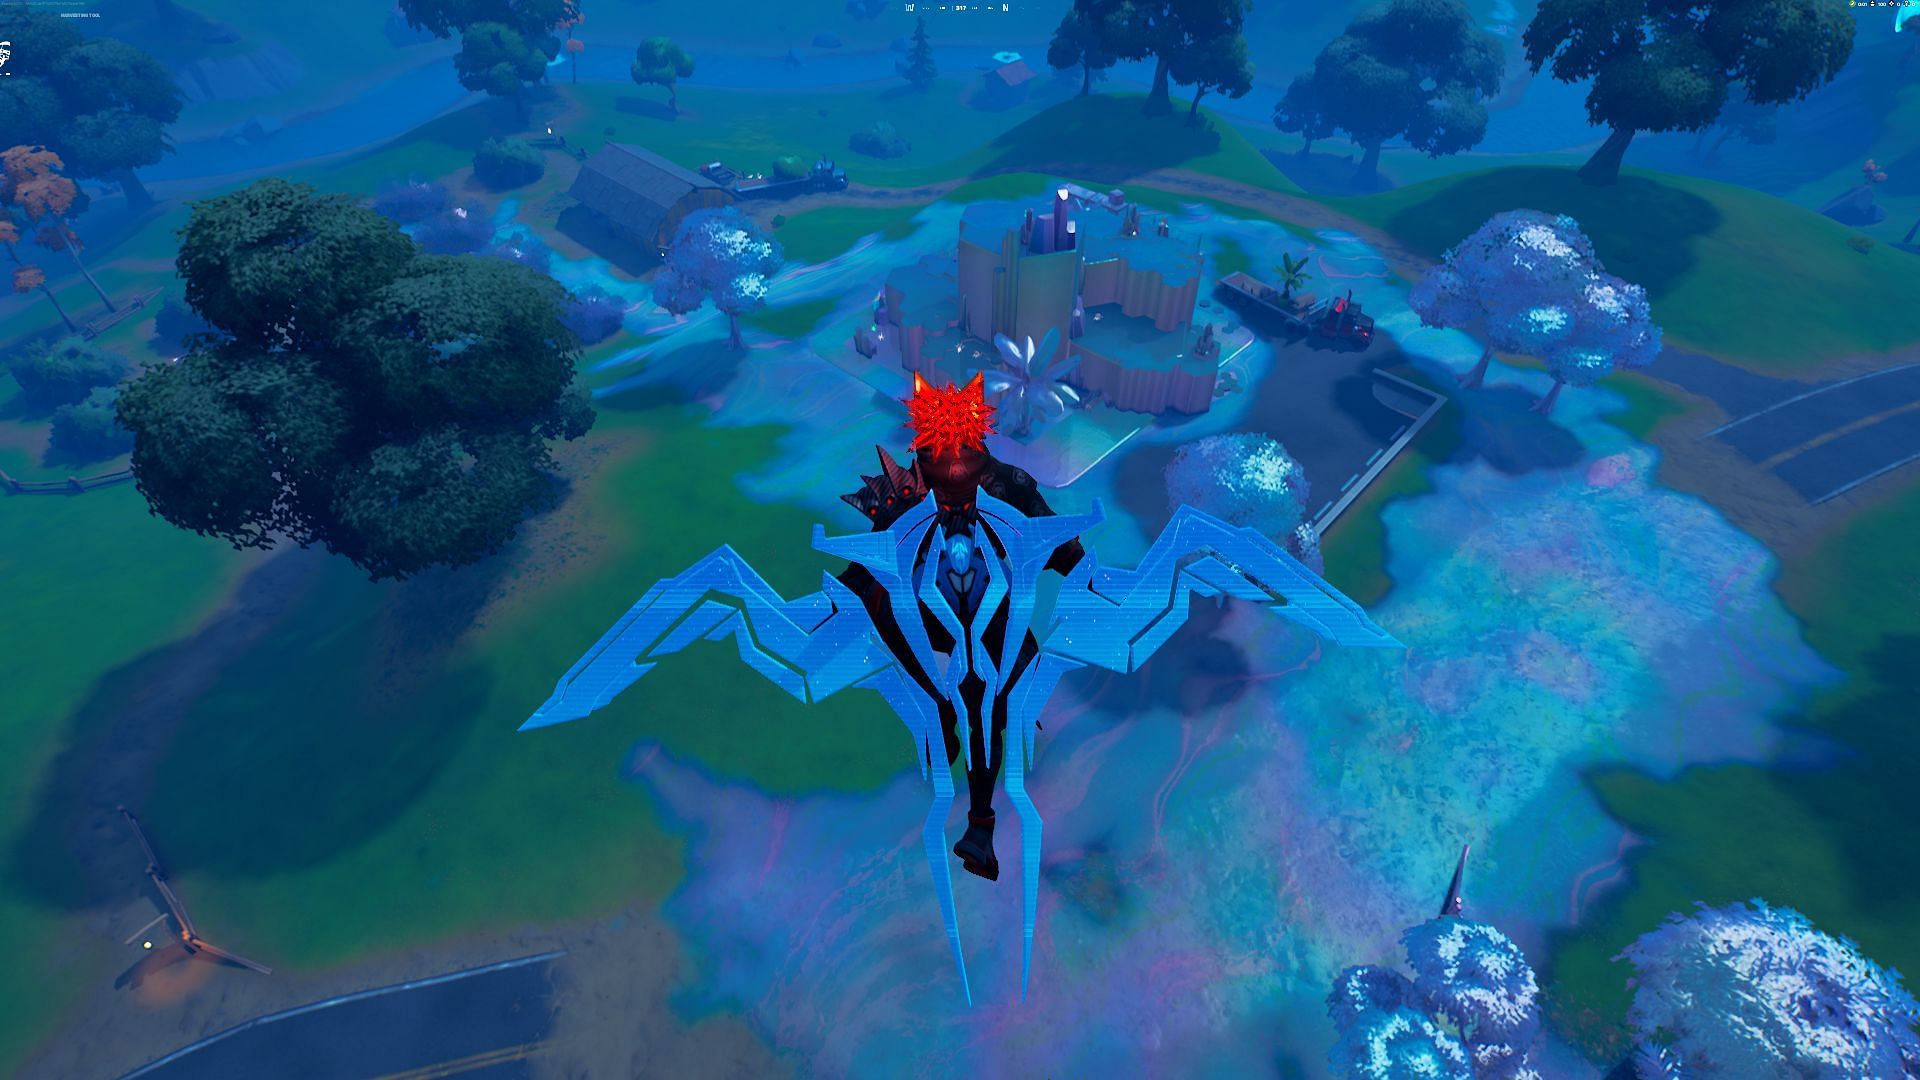 Where are the sunflowers? (Image via Epic Games/Fortnite)